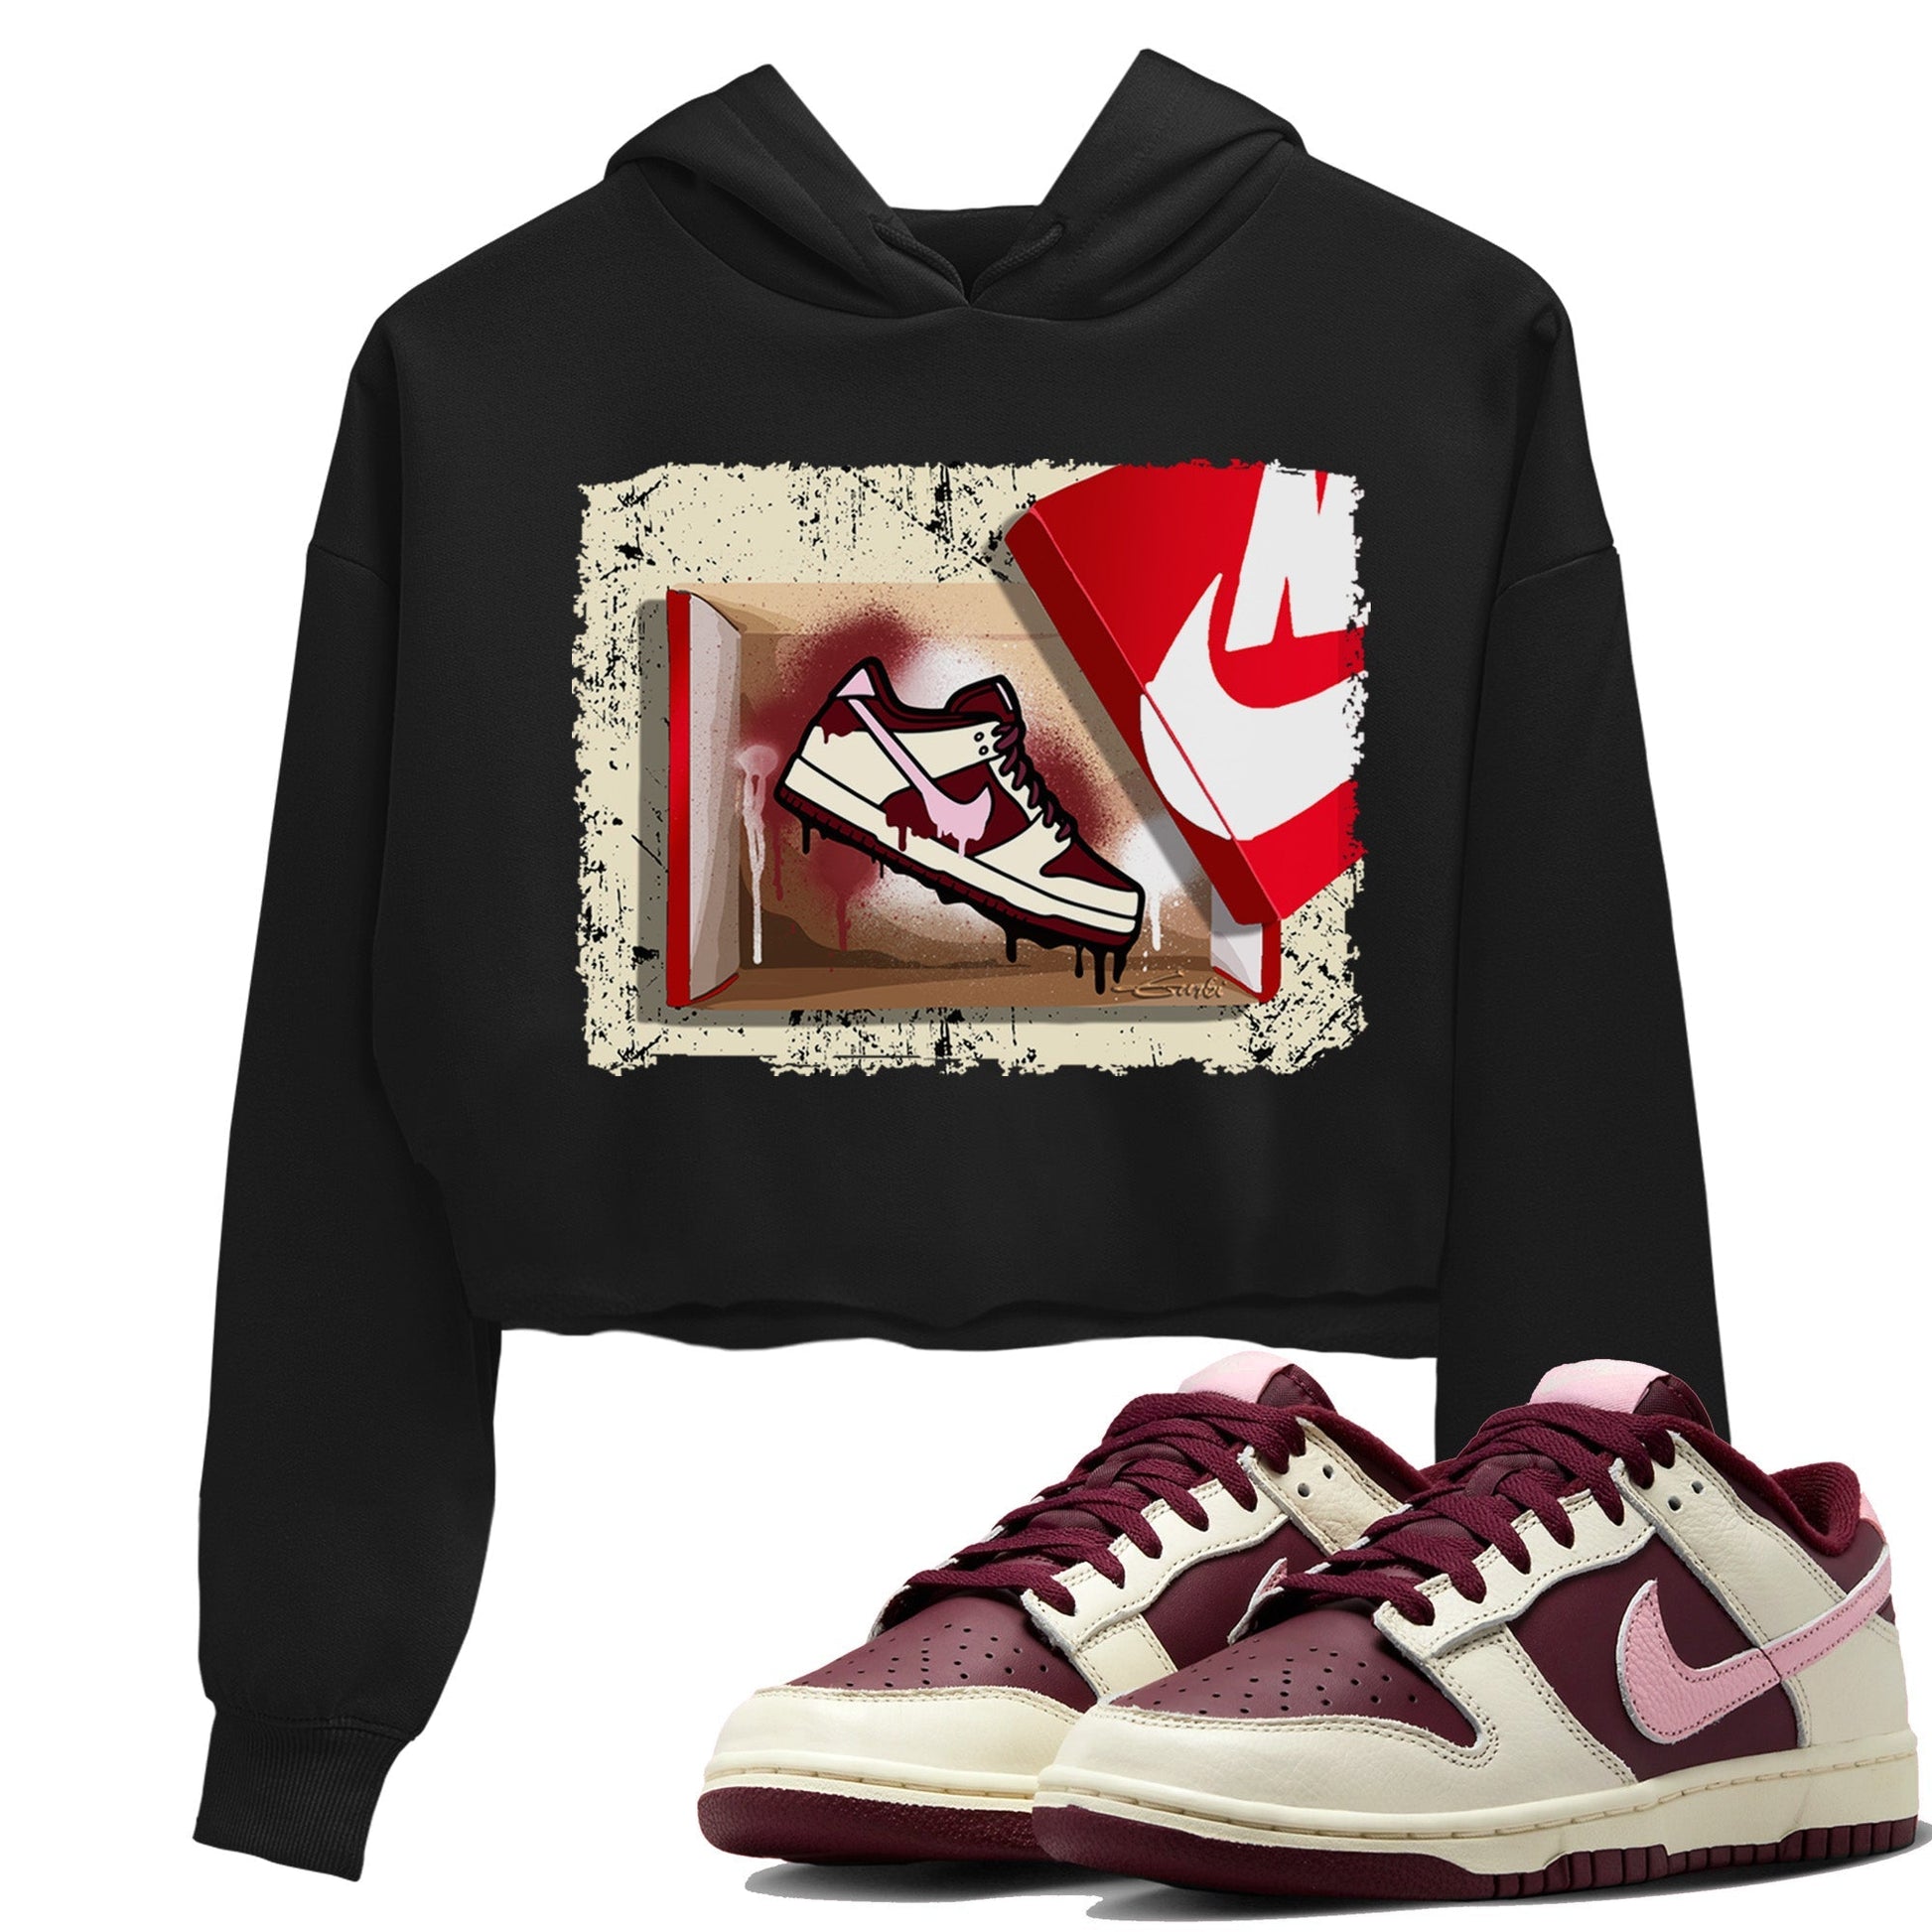 Dunk Valentines Day Sneaker Match Tees New Kicks Sneaker Tees Nike Dunk Valentine's Day Sneaker SNRT Sneaker Tees Women's Shirts